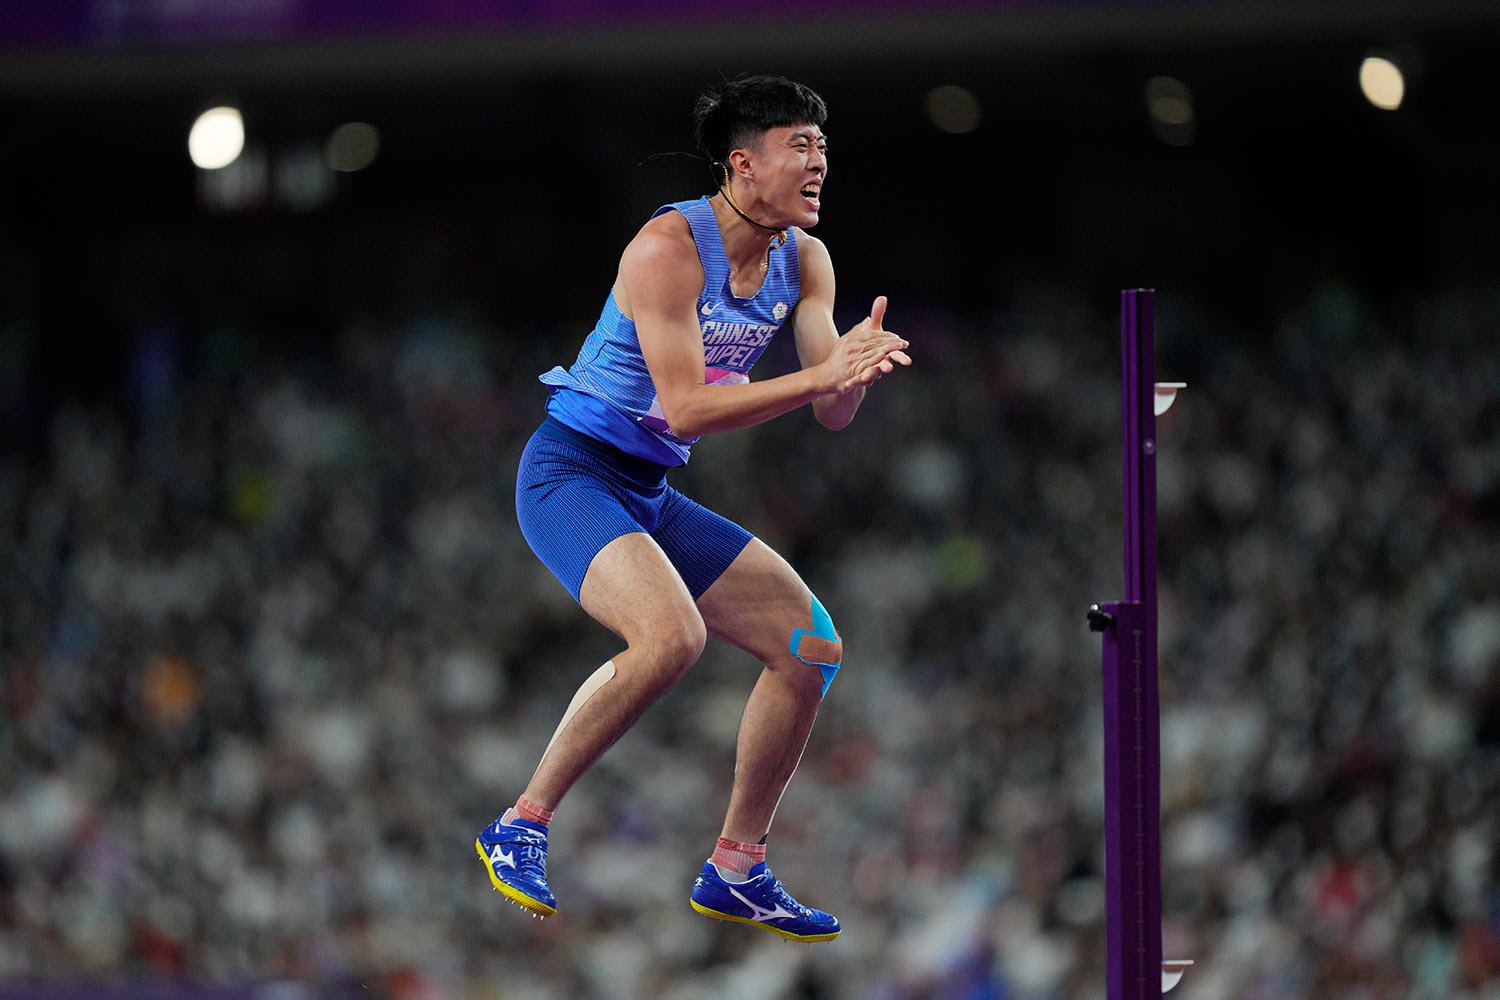  Taiwan's Cho Chia-Hsuan reacts during the men's decathlon high jump at the 19th Asian Games in Hangzhou, China, Monday, Oct. 2, 2023. (AP Photo/Vincent Thian) 